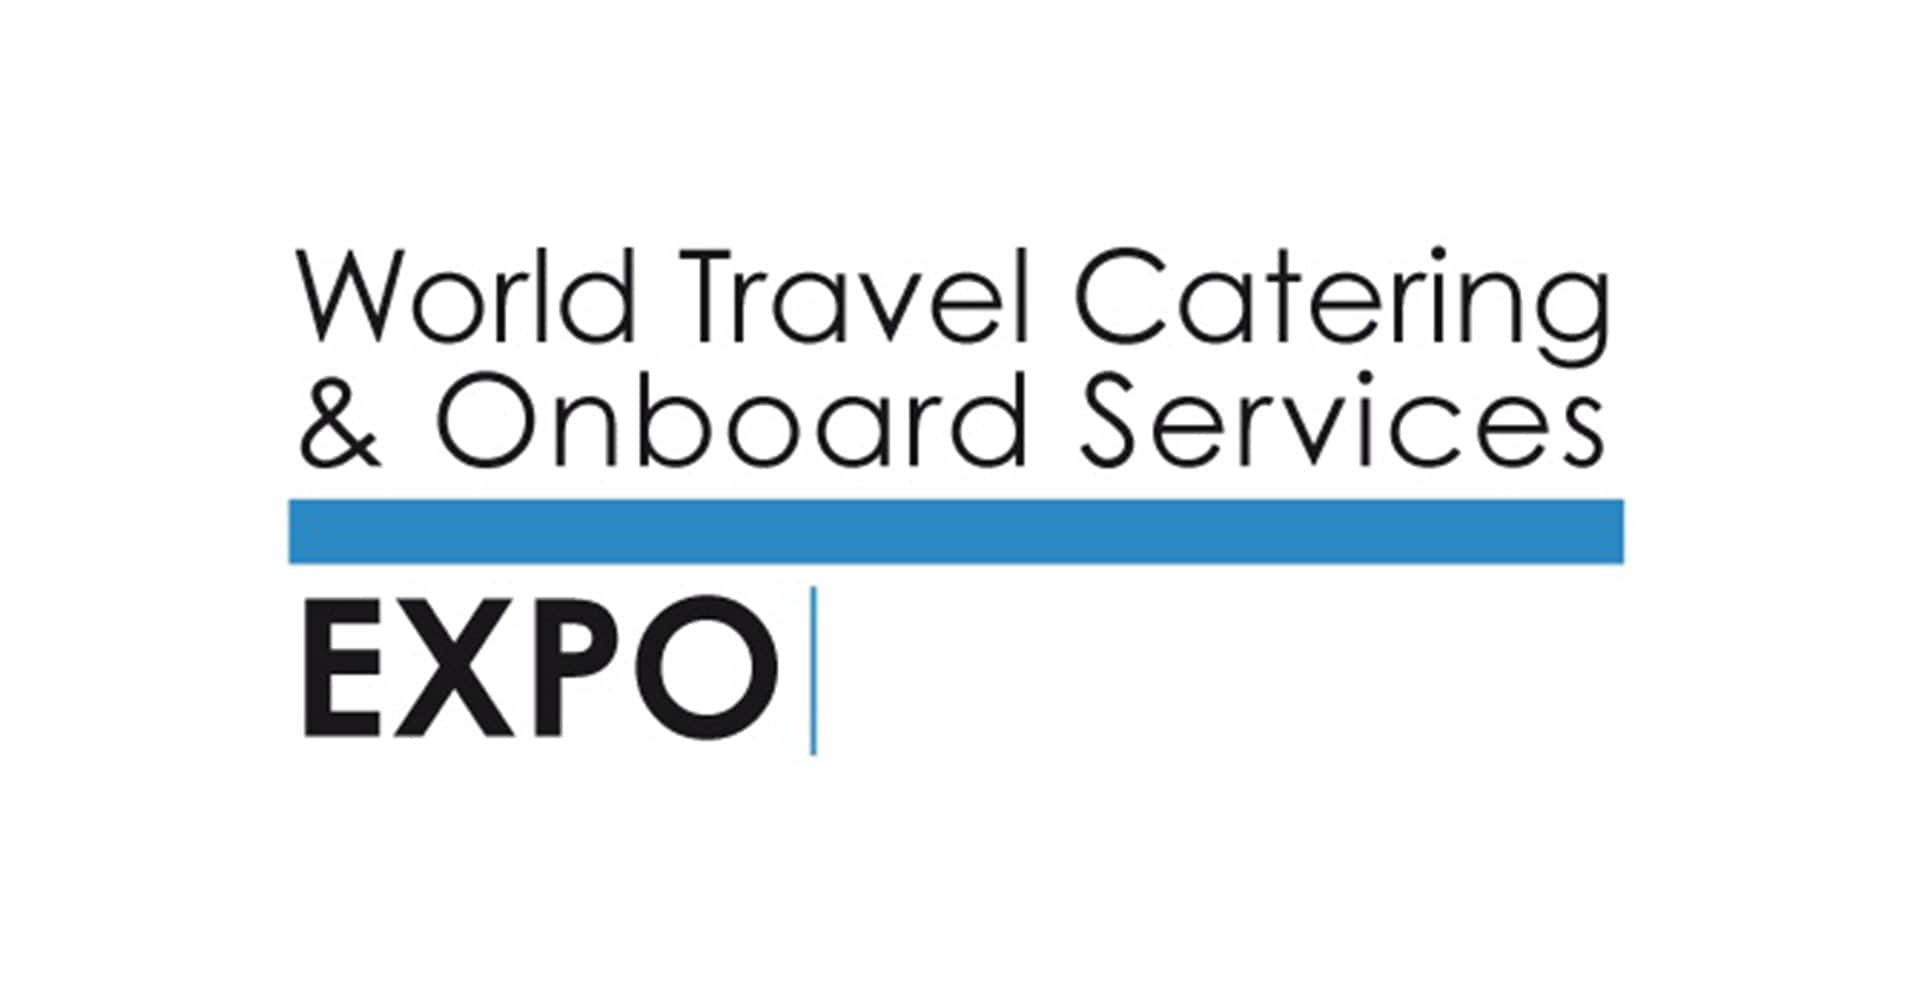 World Travel Catering & Onboard Services